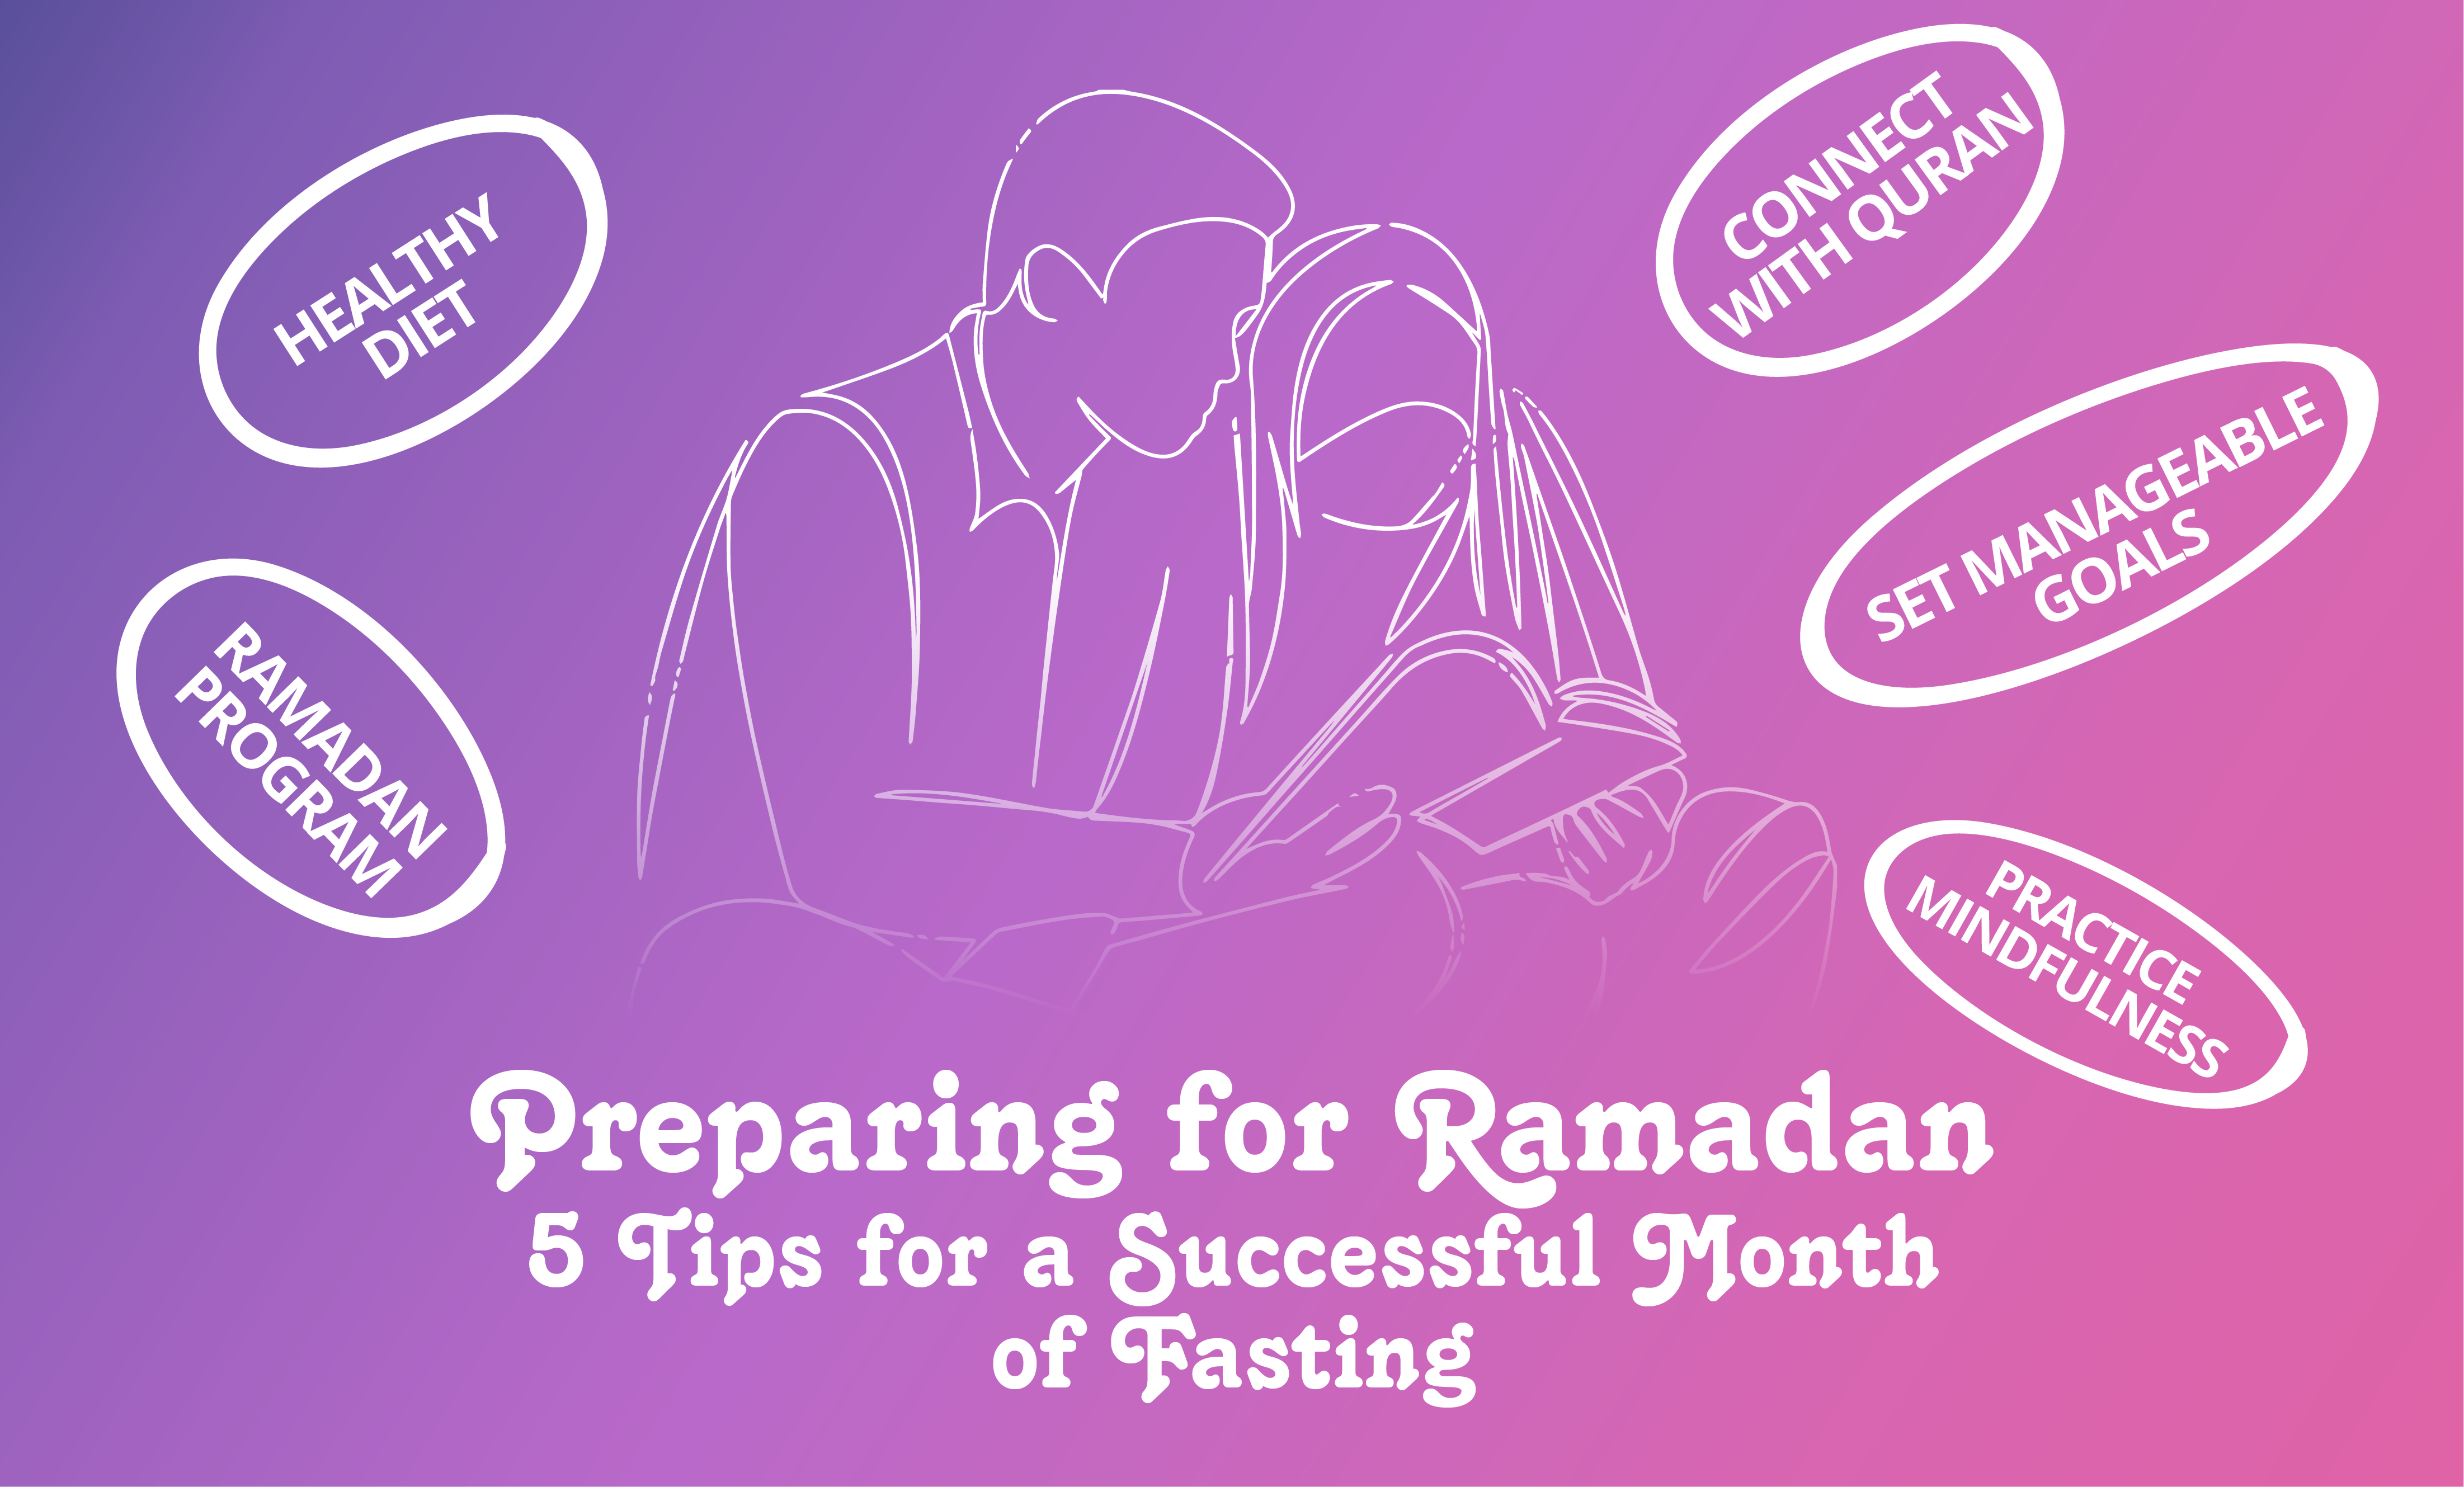 Preparing for Ramadan: 5 Tips for a Successful Month of Fasting